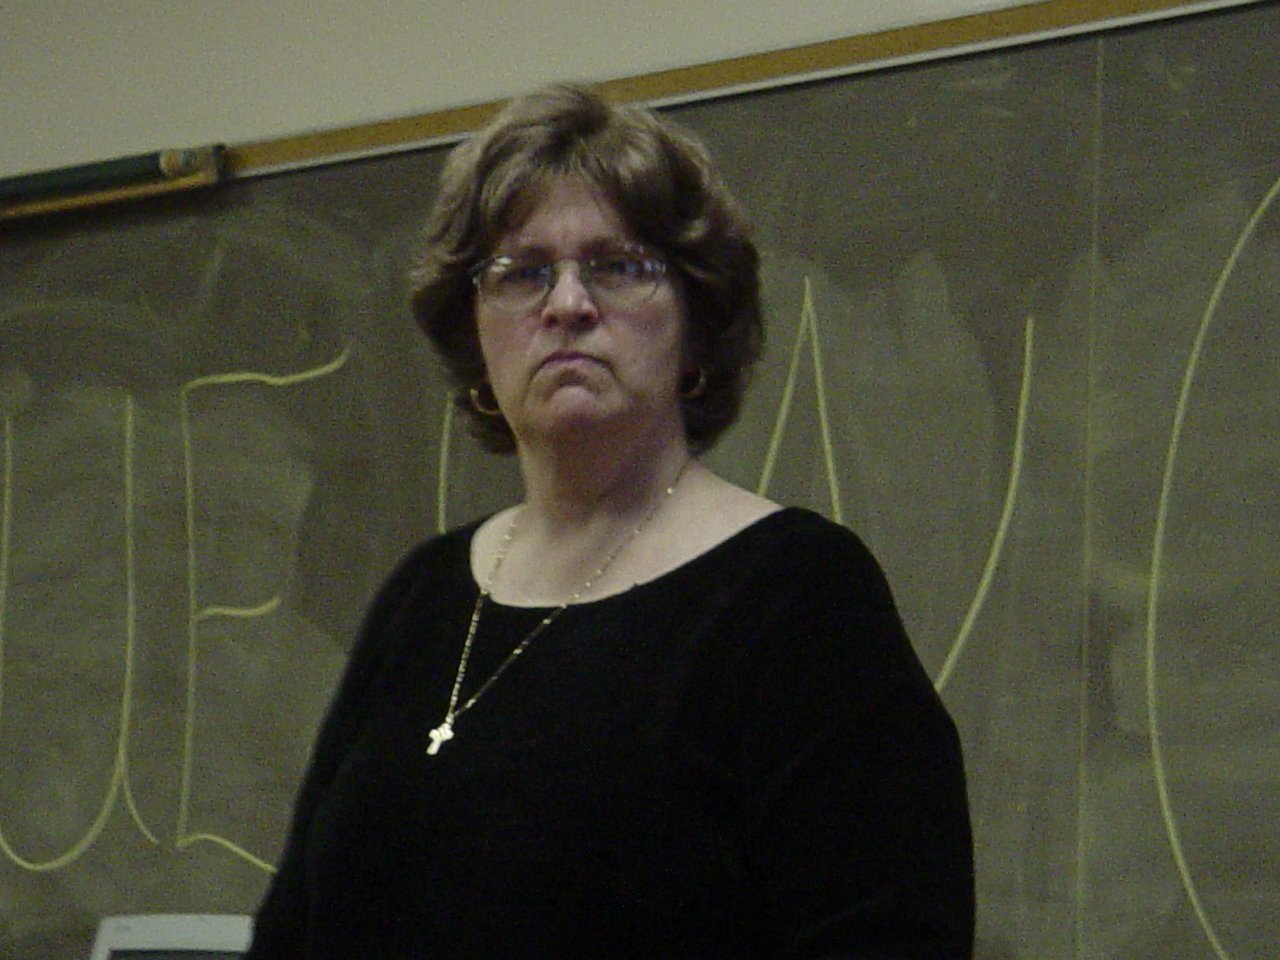 a woman in glasses standing in front of a blackboard with a chalk written on it